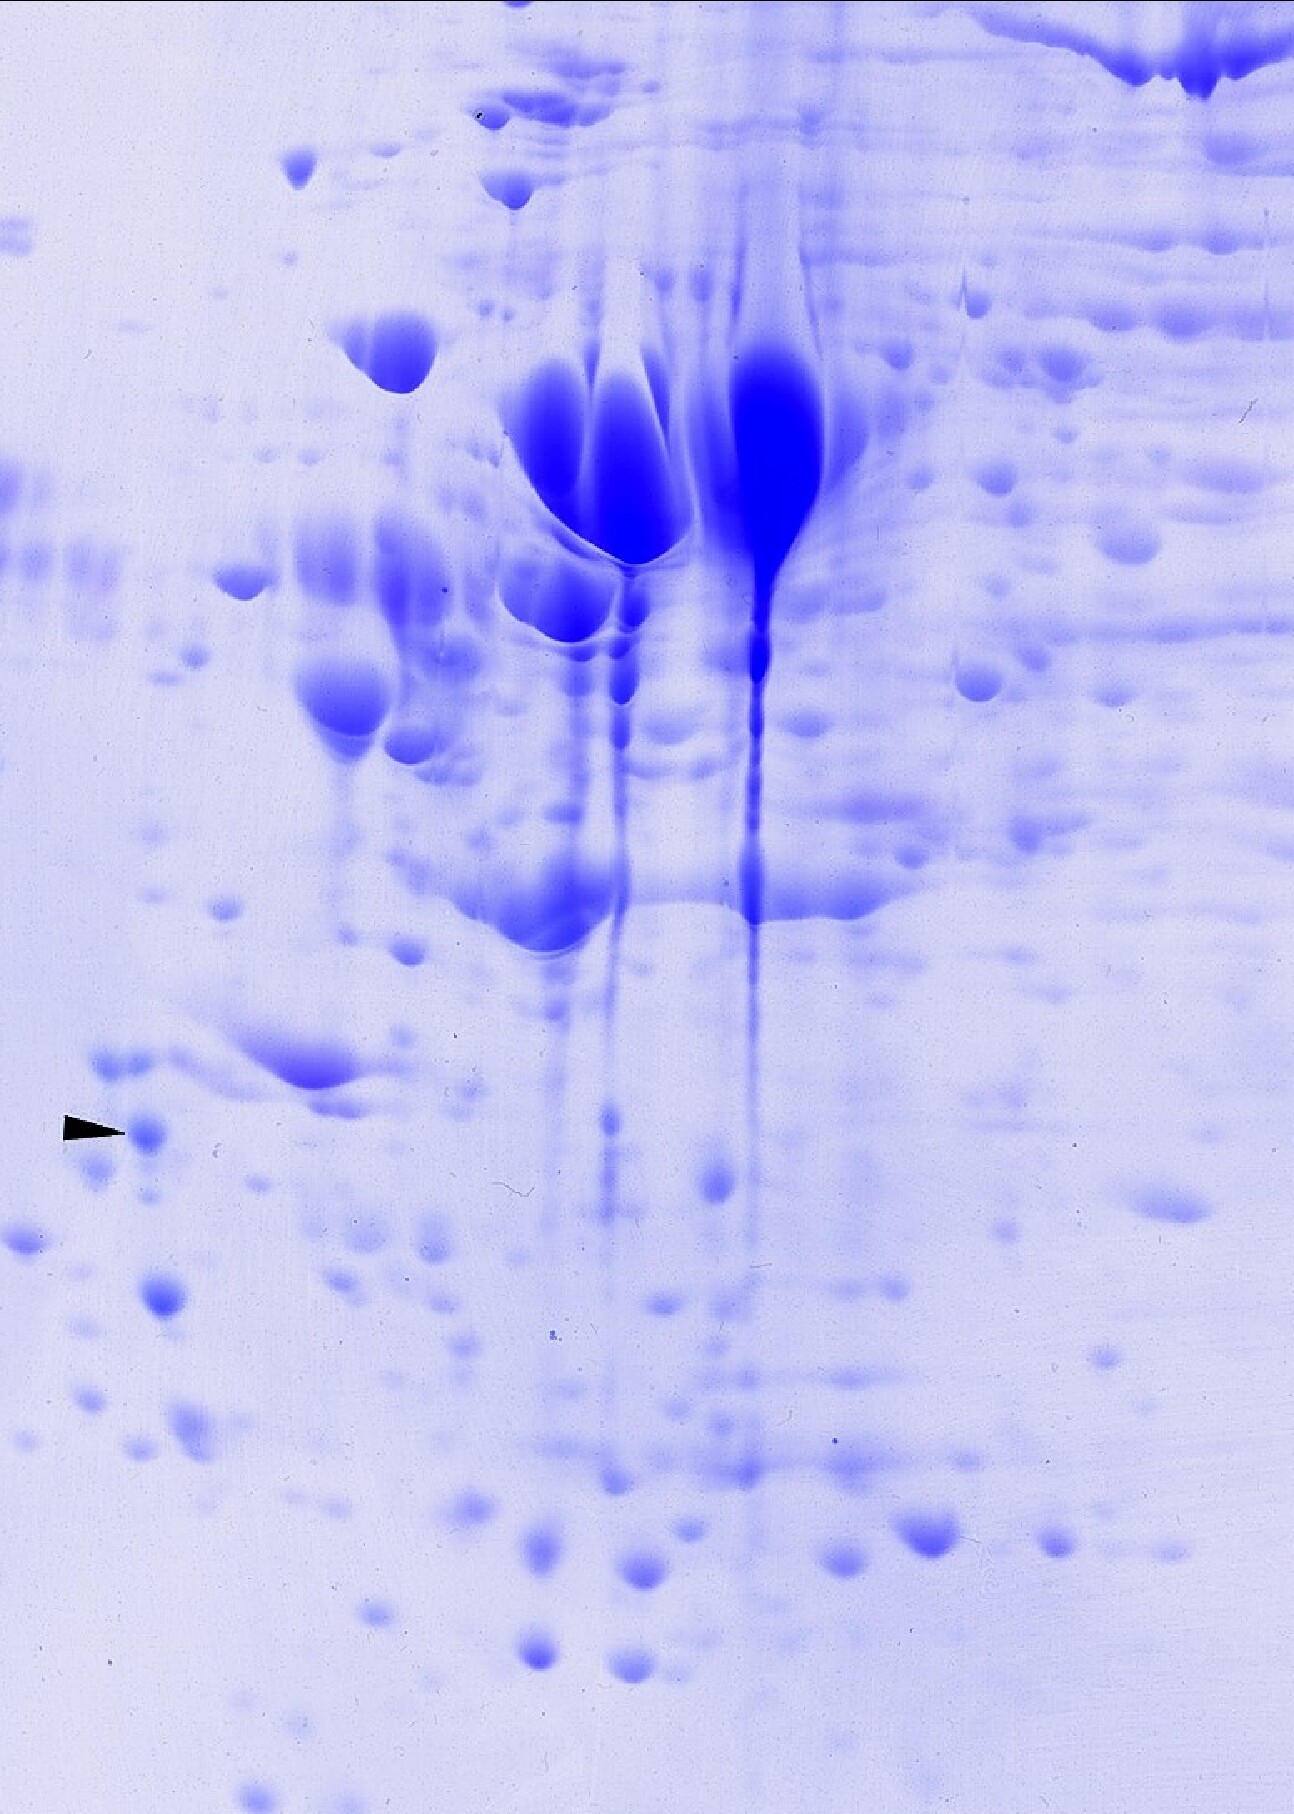 Coomassie blue-stained (quantitative, Mass Spec compatible) 2D large format gel with 600 µg protein